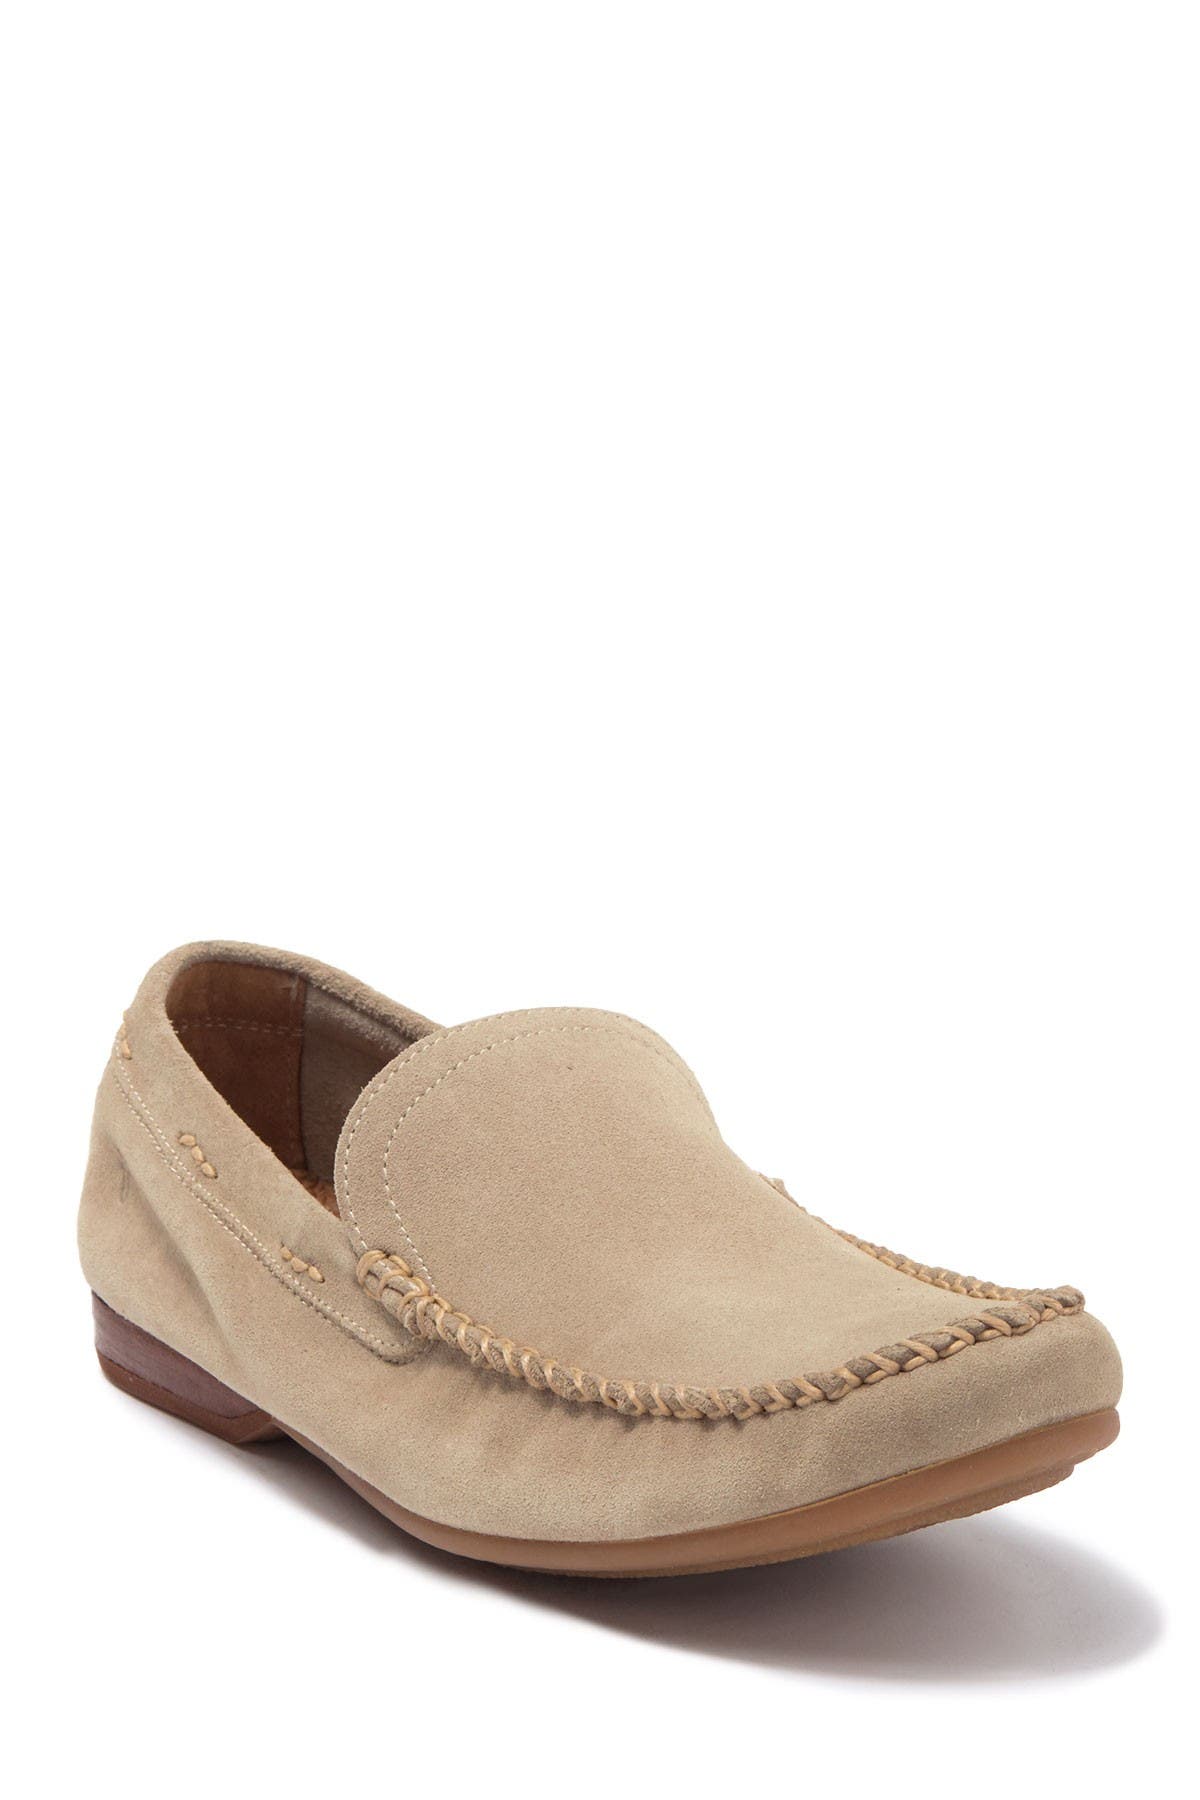 frye suede loafers